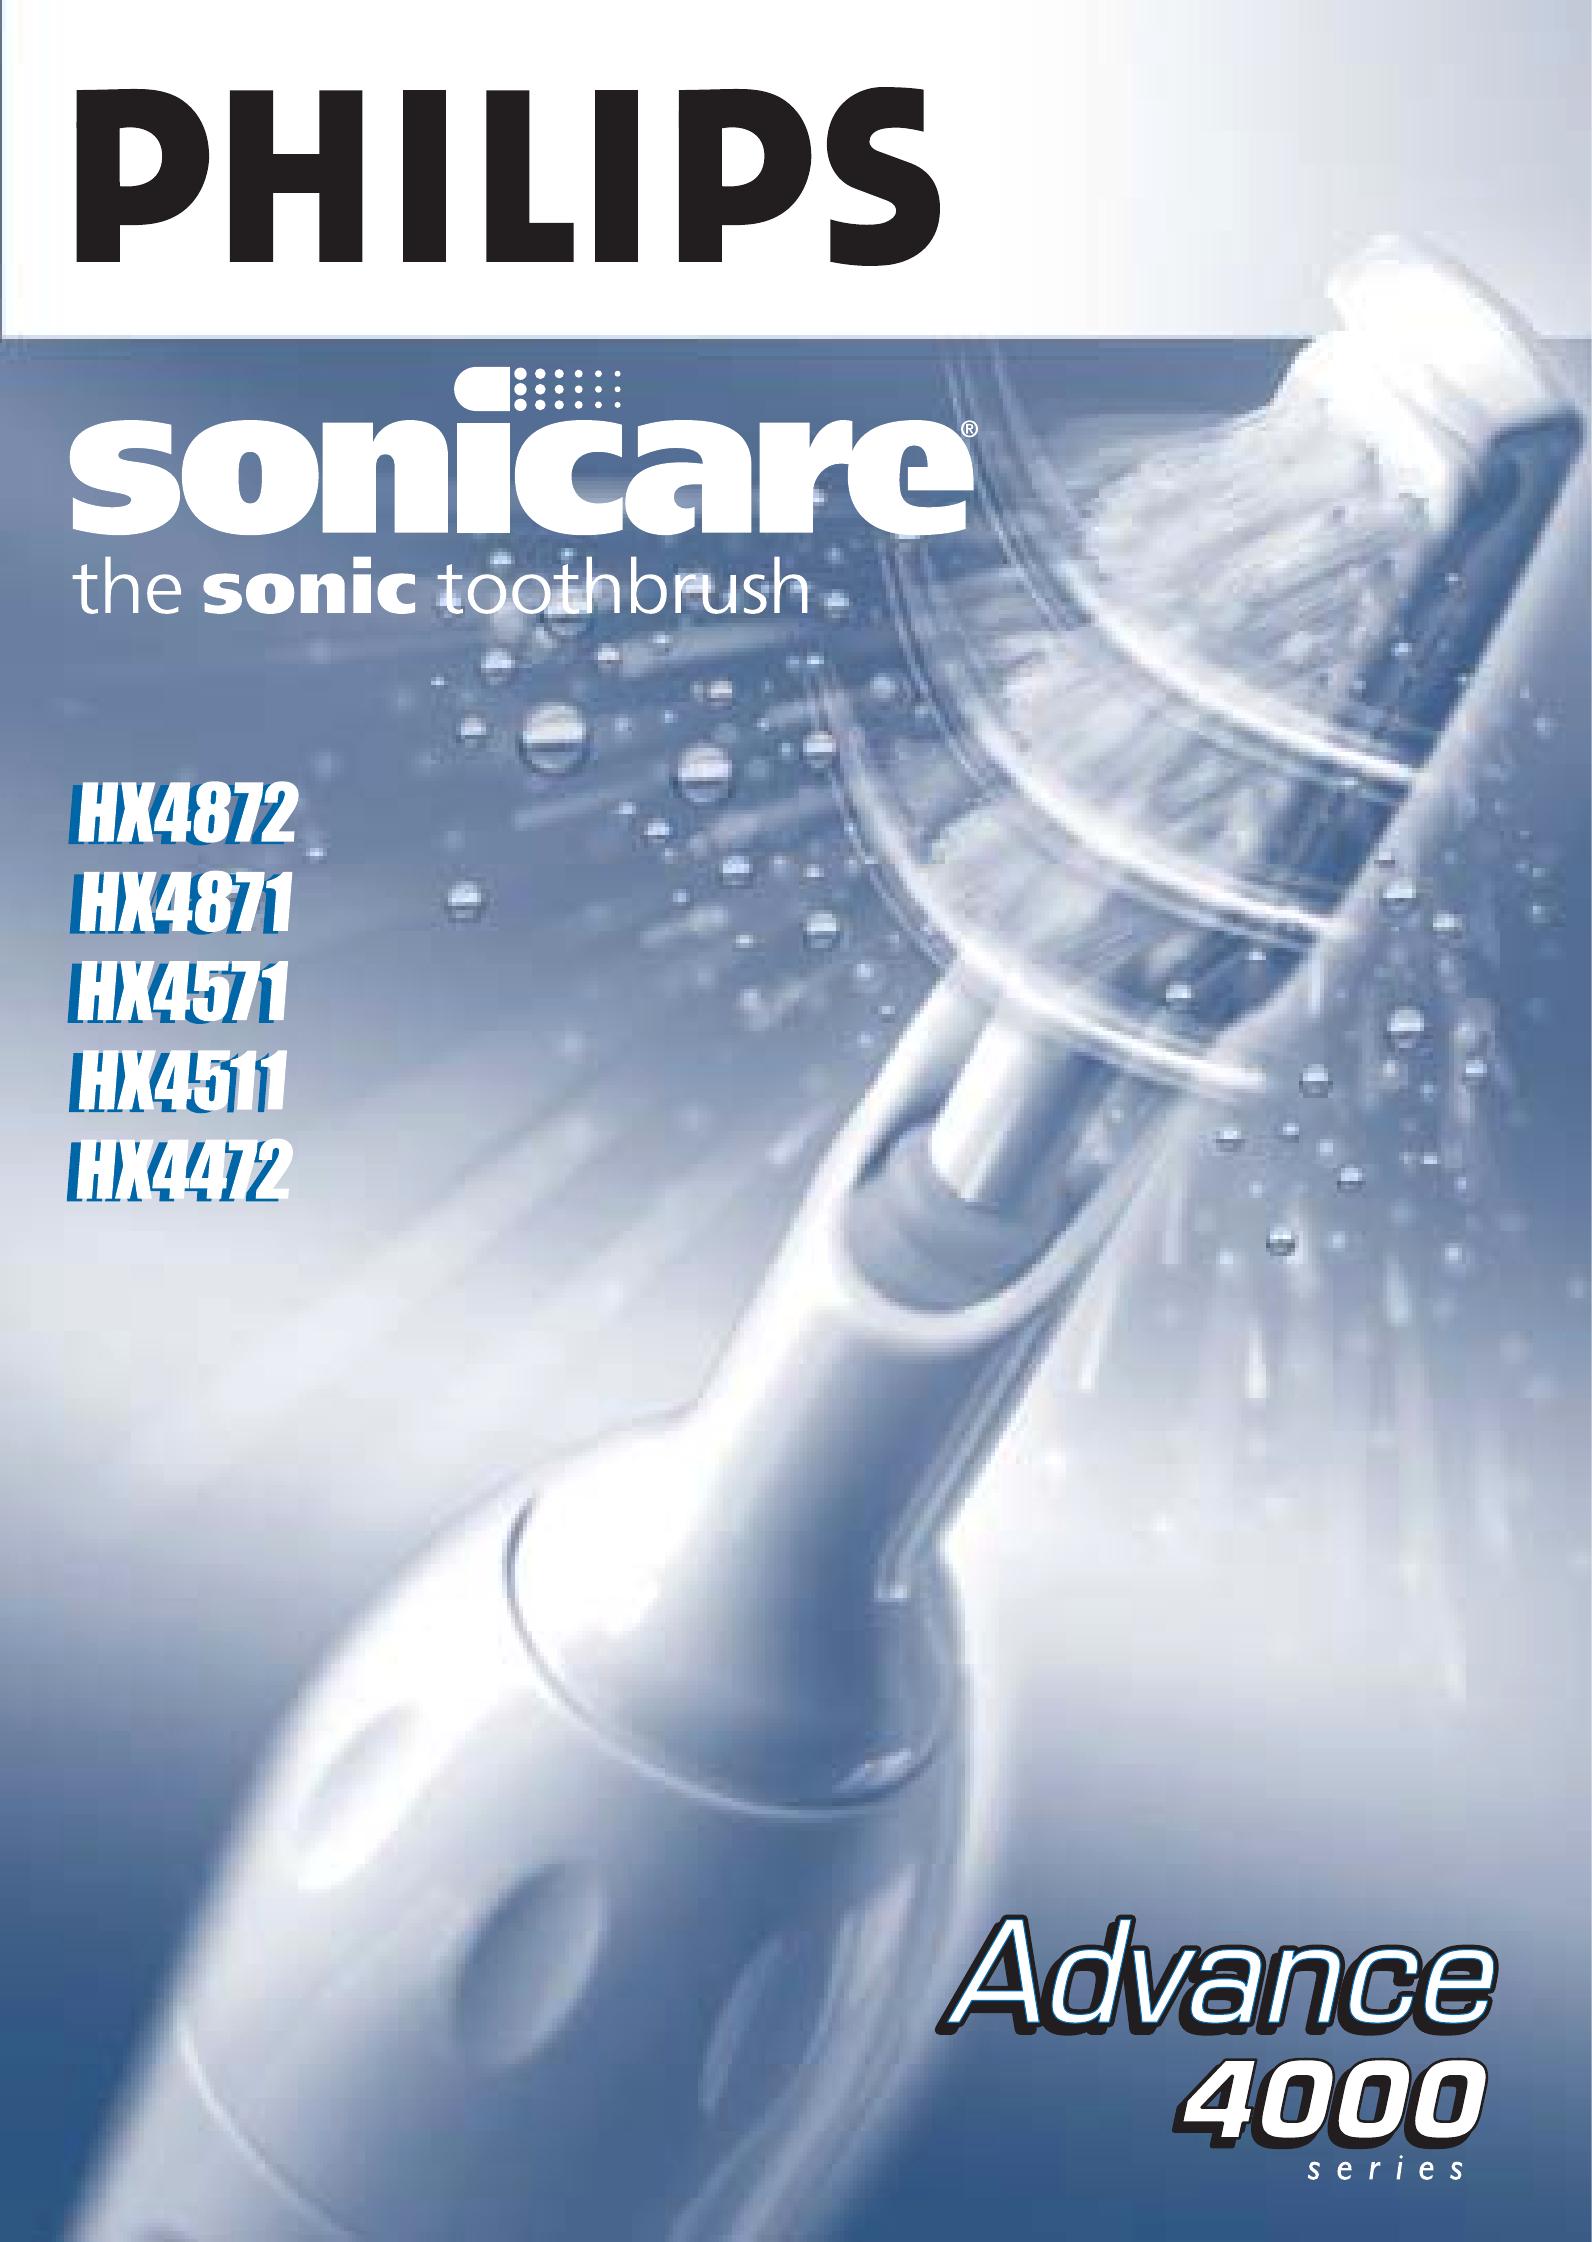 Sonicare HX4571 Electric Toothbrush User Manual